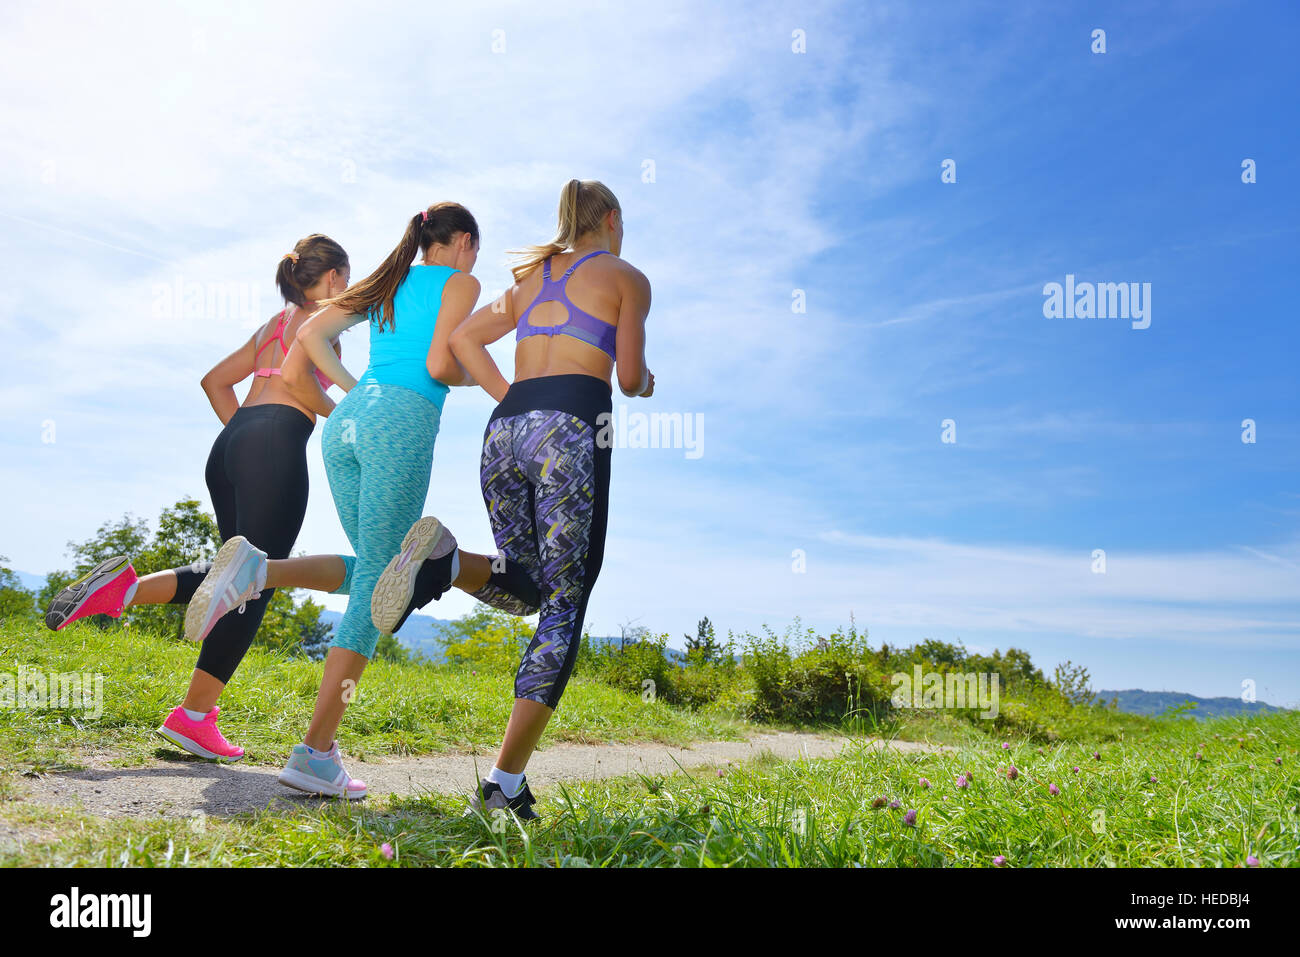 Two Women Jogging In Park Stock Photo, Picture and Royalty Free Image.  Image 90176960.